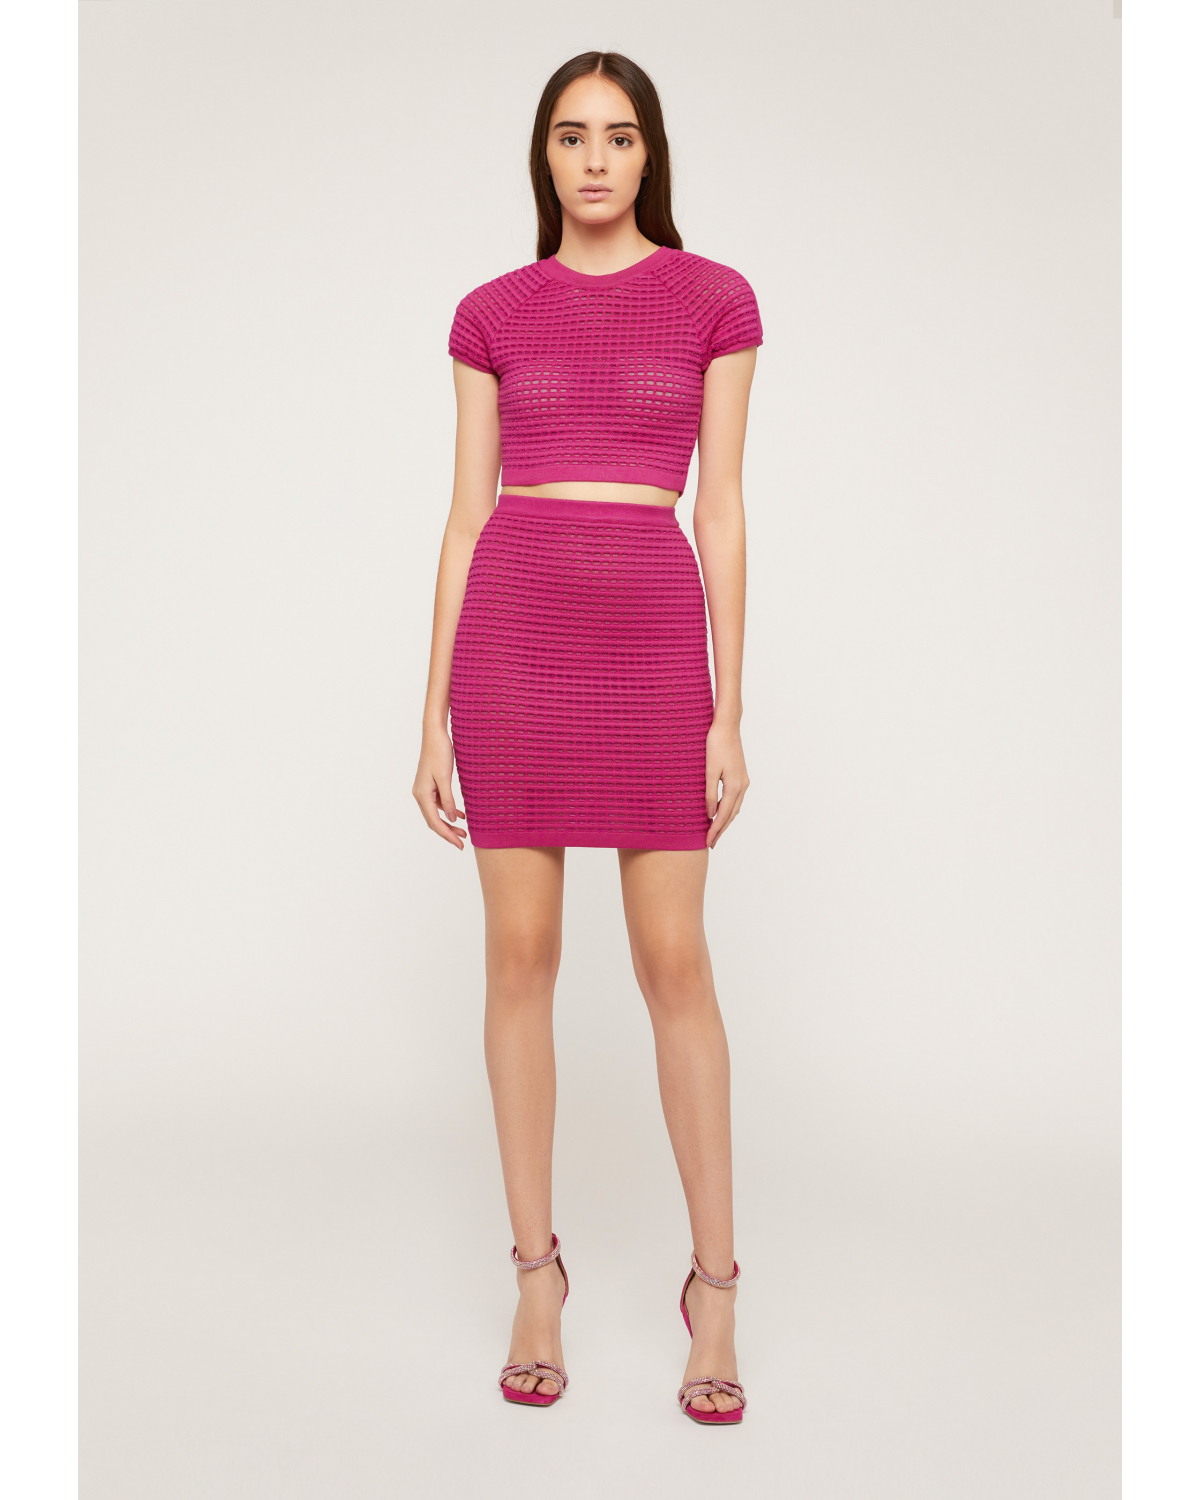 Fuchsia iconic skirt | Iconic Capsule Collection, 73_74 | Genny